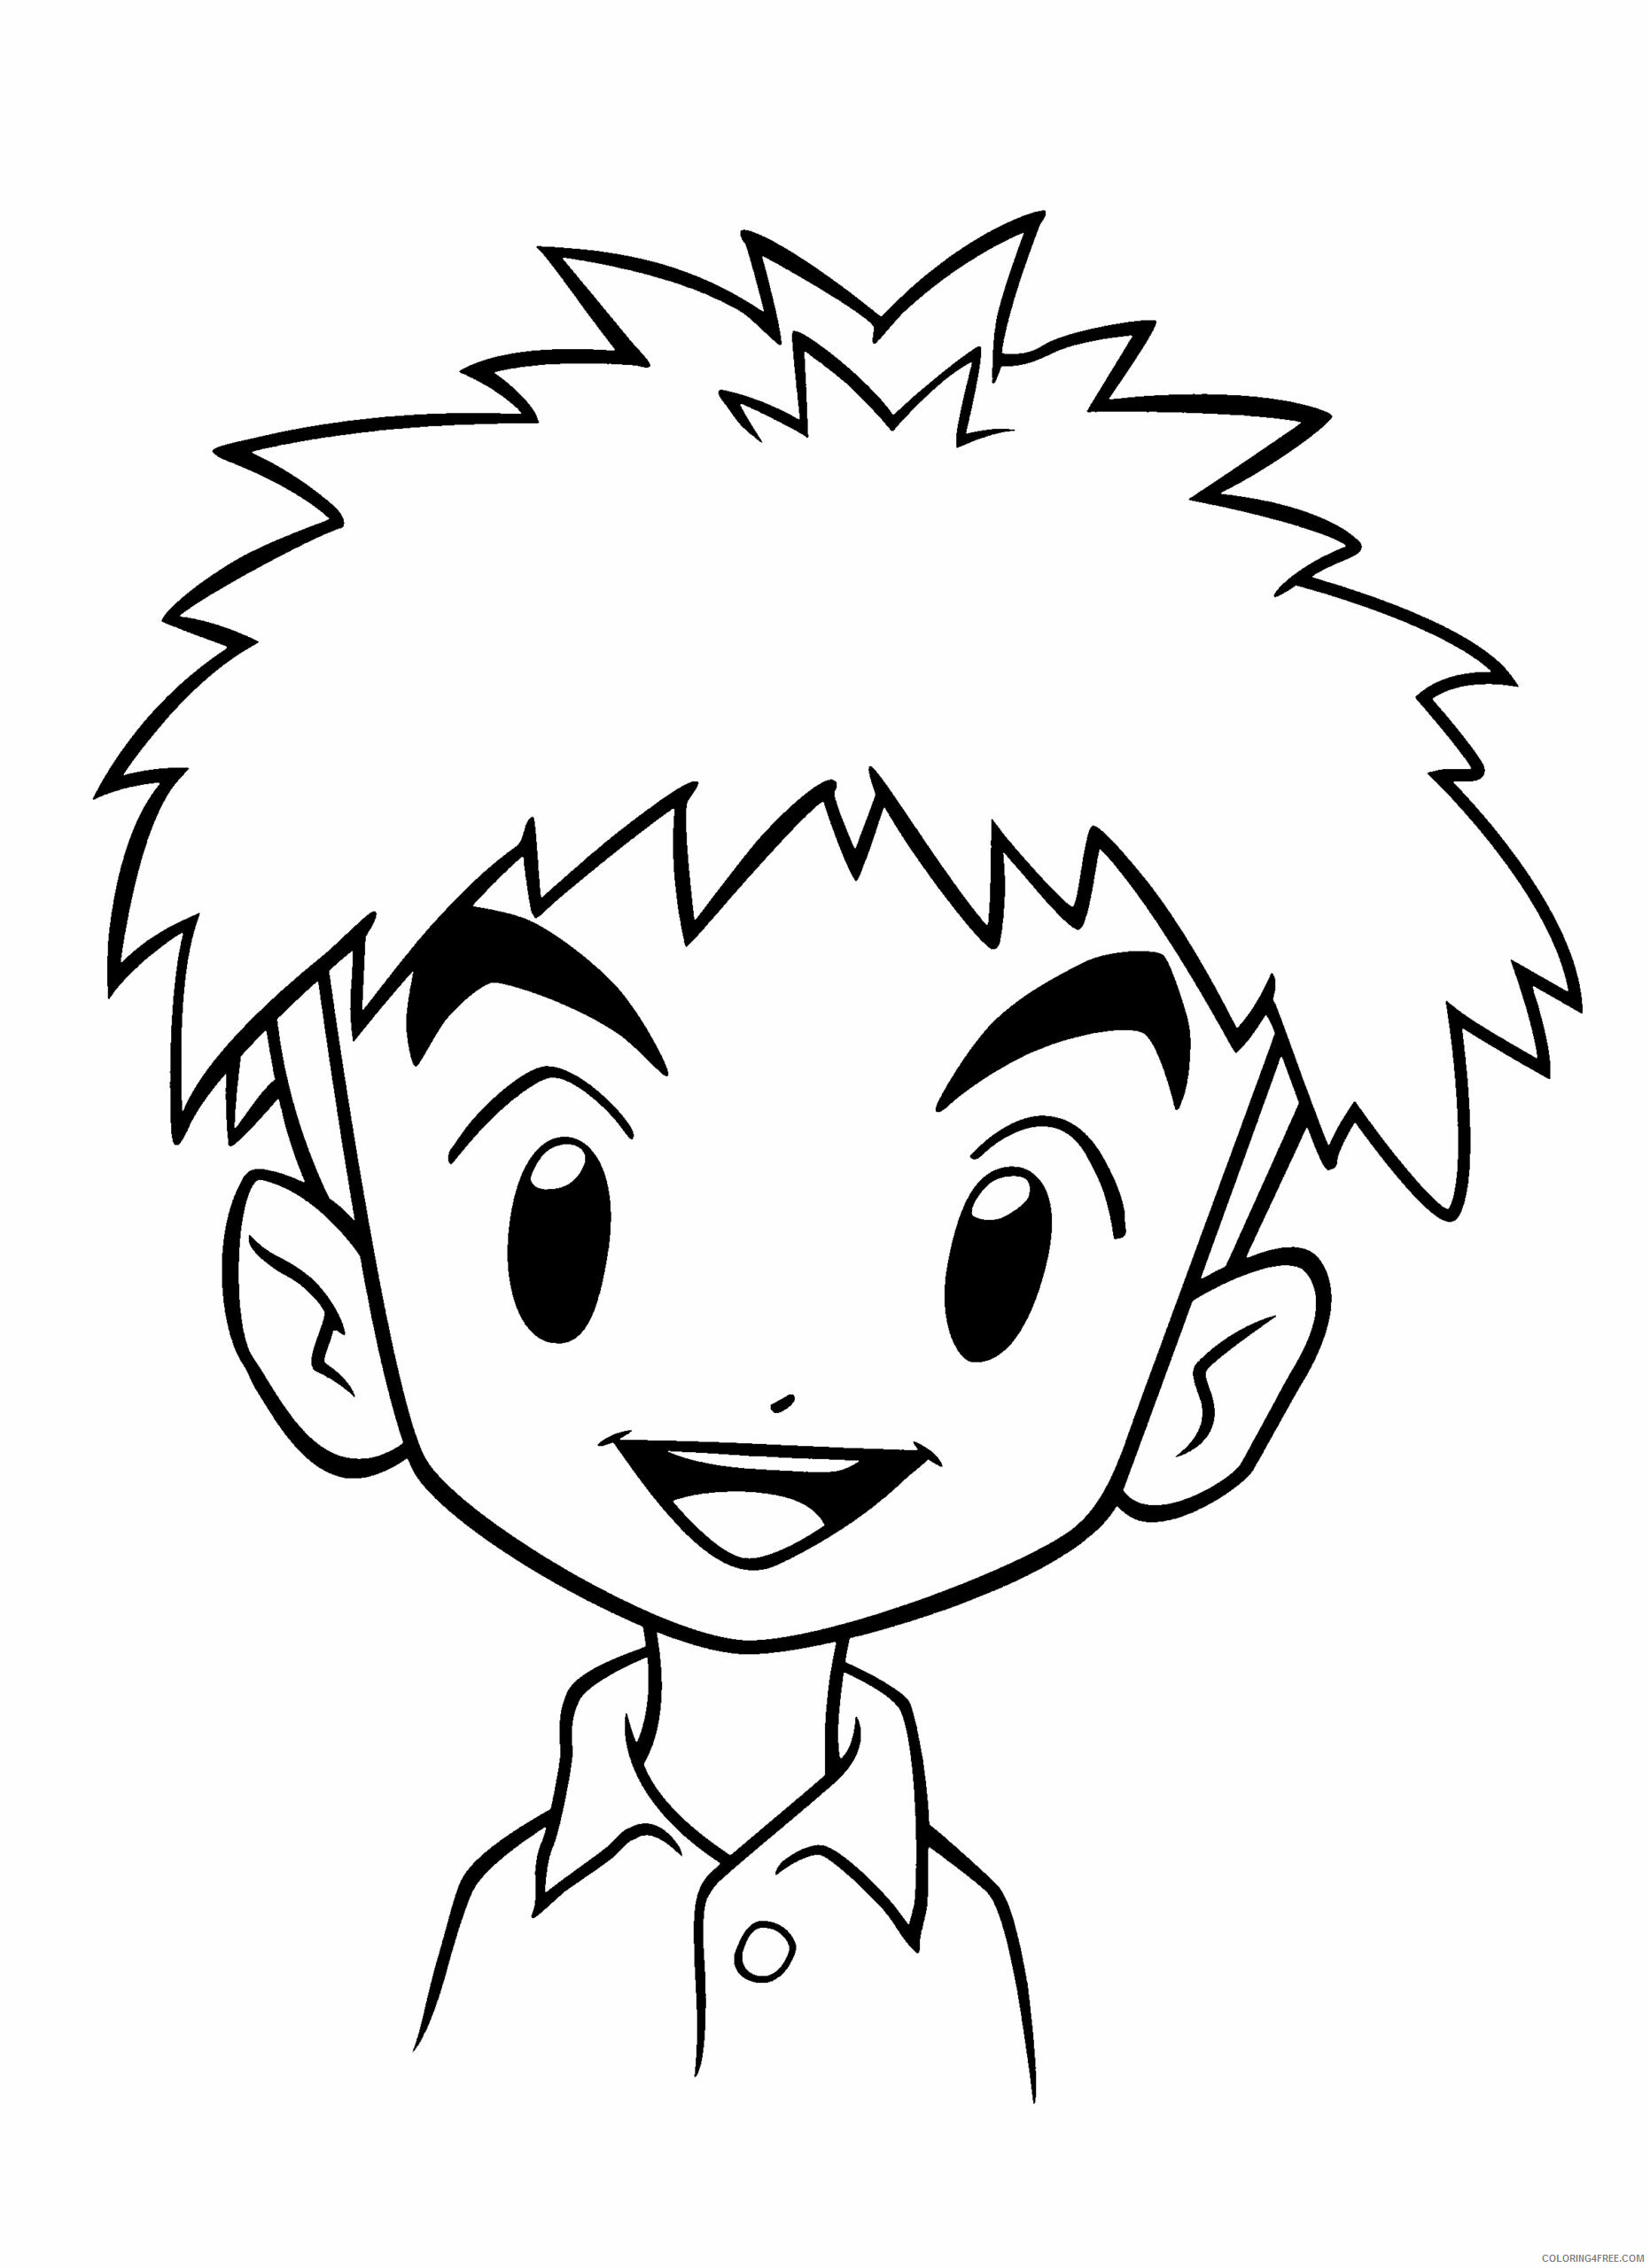 Digimon Printable Coloring Pages Anime digimon fiiVe 2021 0169 Coloring4free